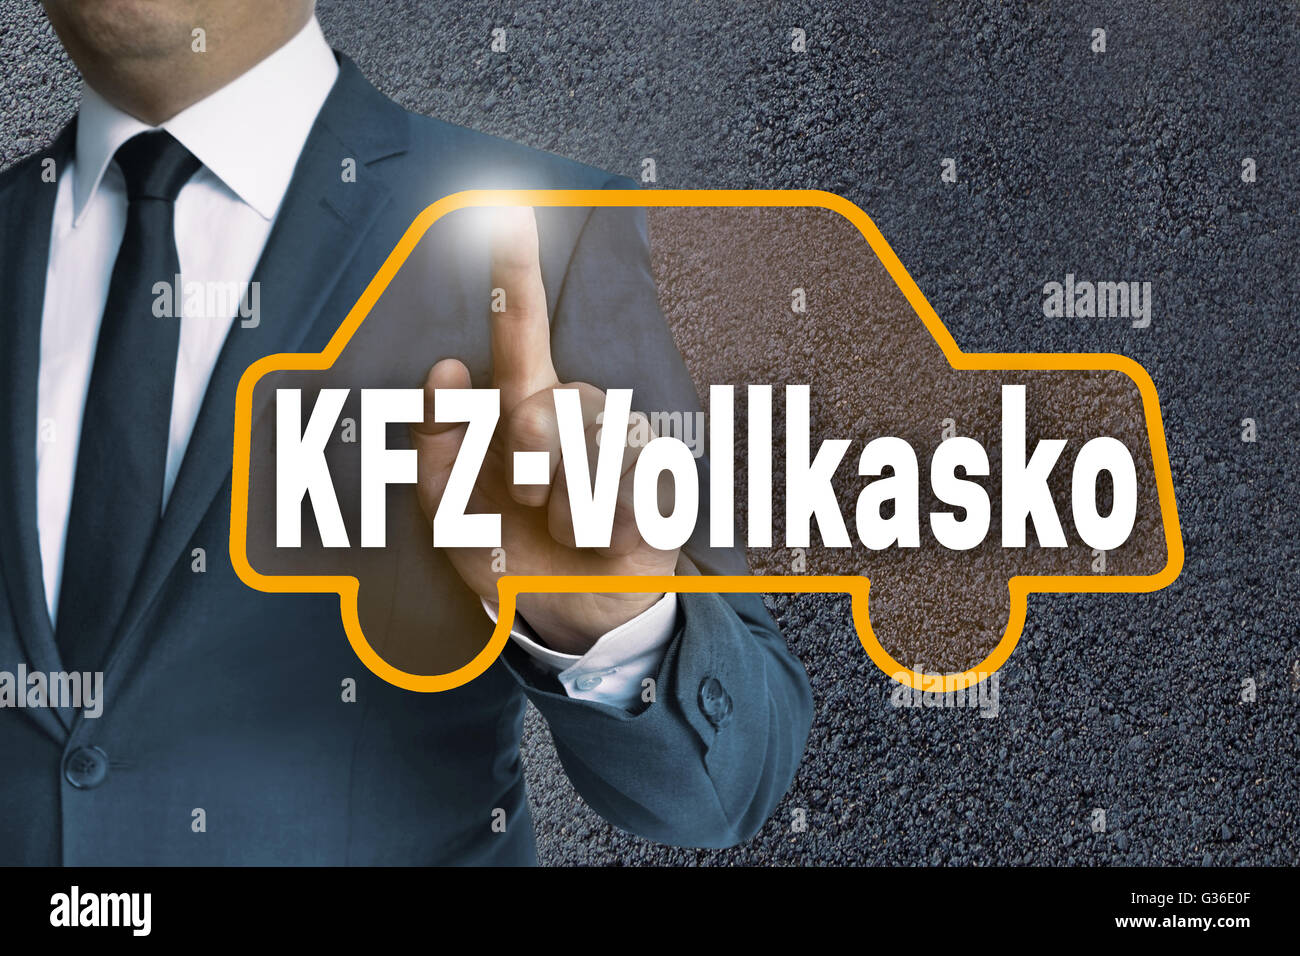 kfz vollkasko (in german car fully comprehensive) car touchscreen is operated by businessman concept. Stock Photo